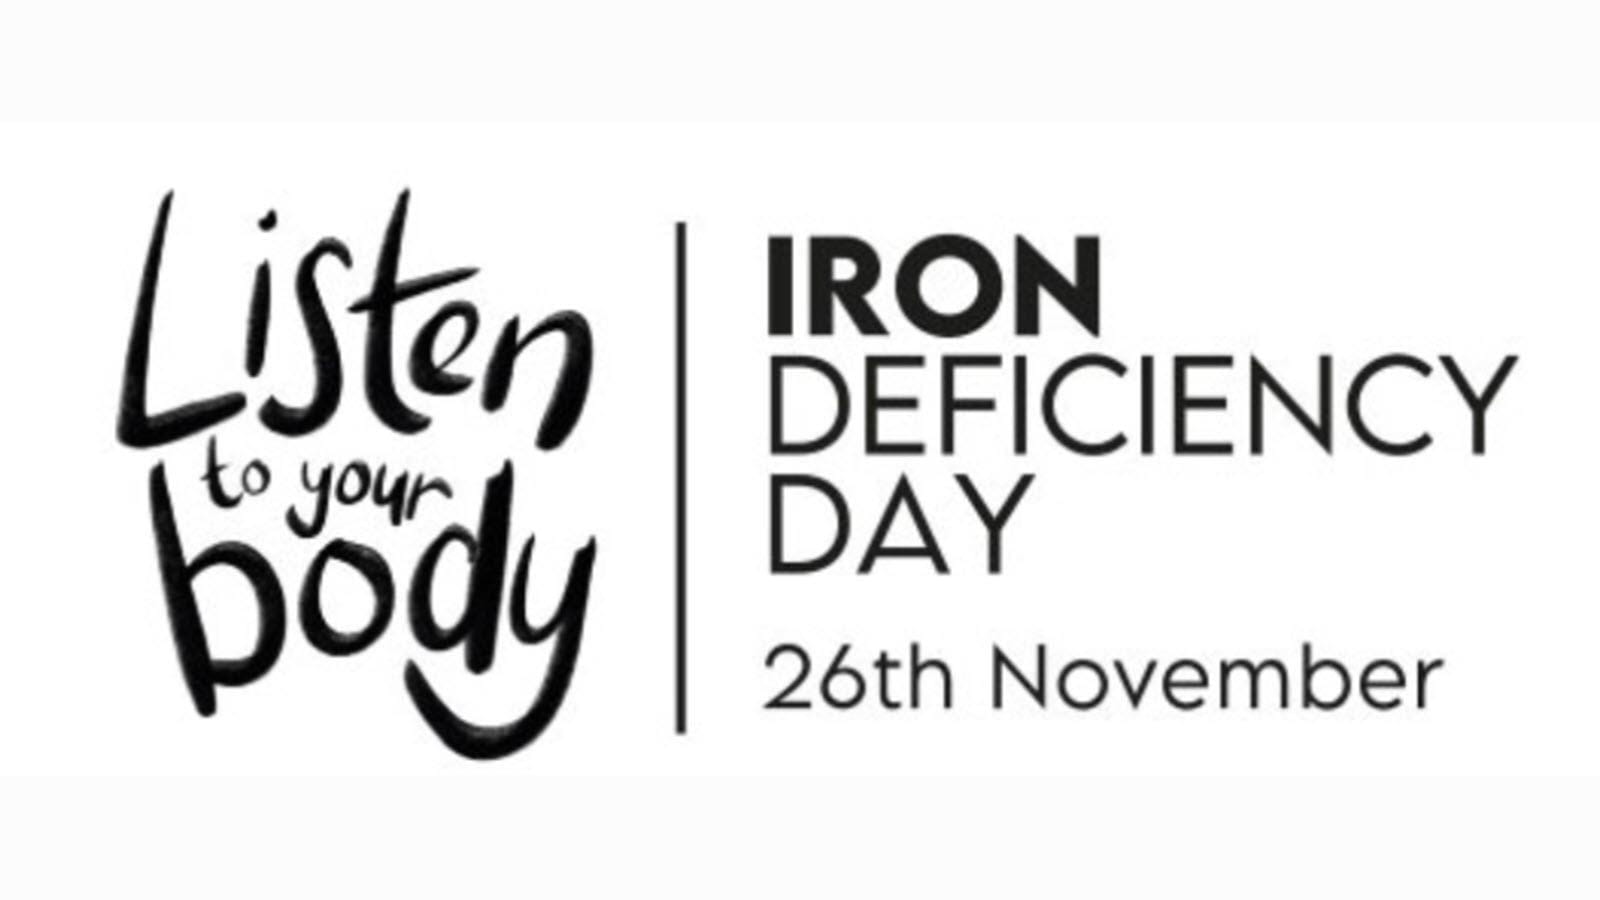 Listen to your body - Iron Deficiency Day 26 November